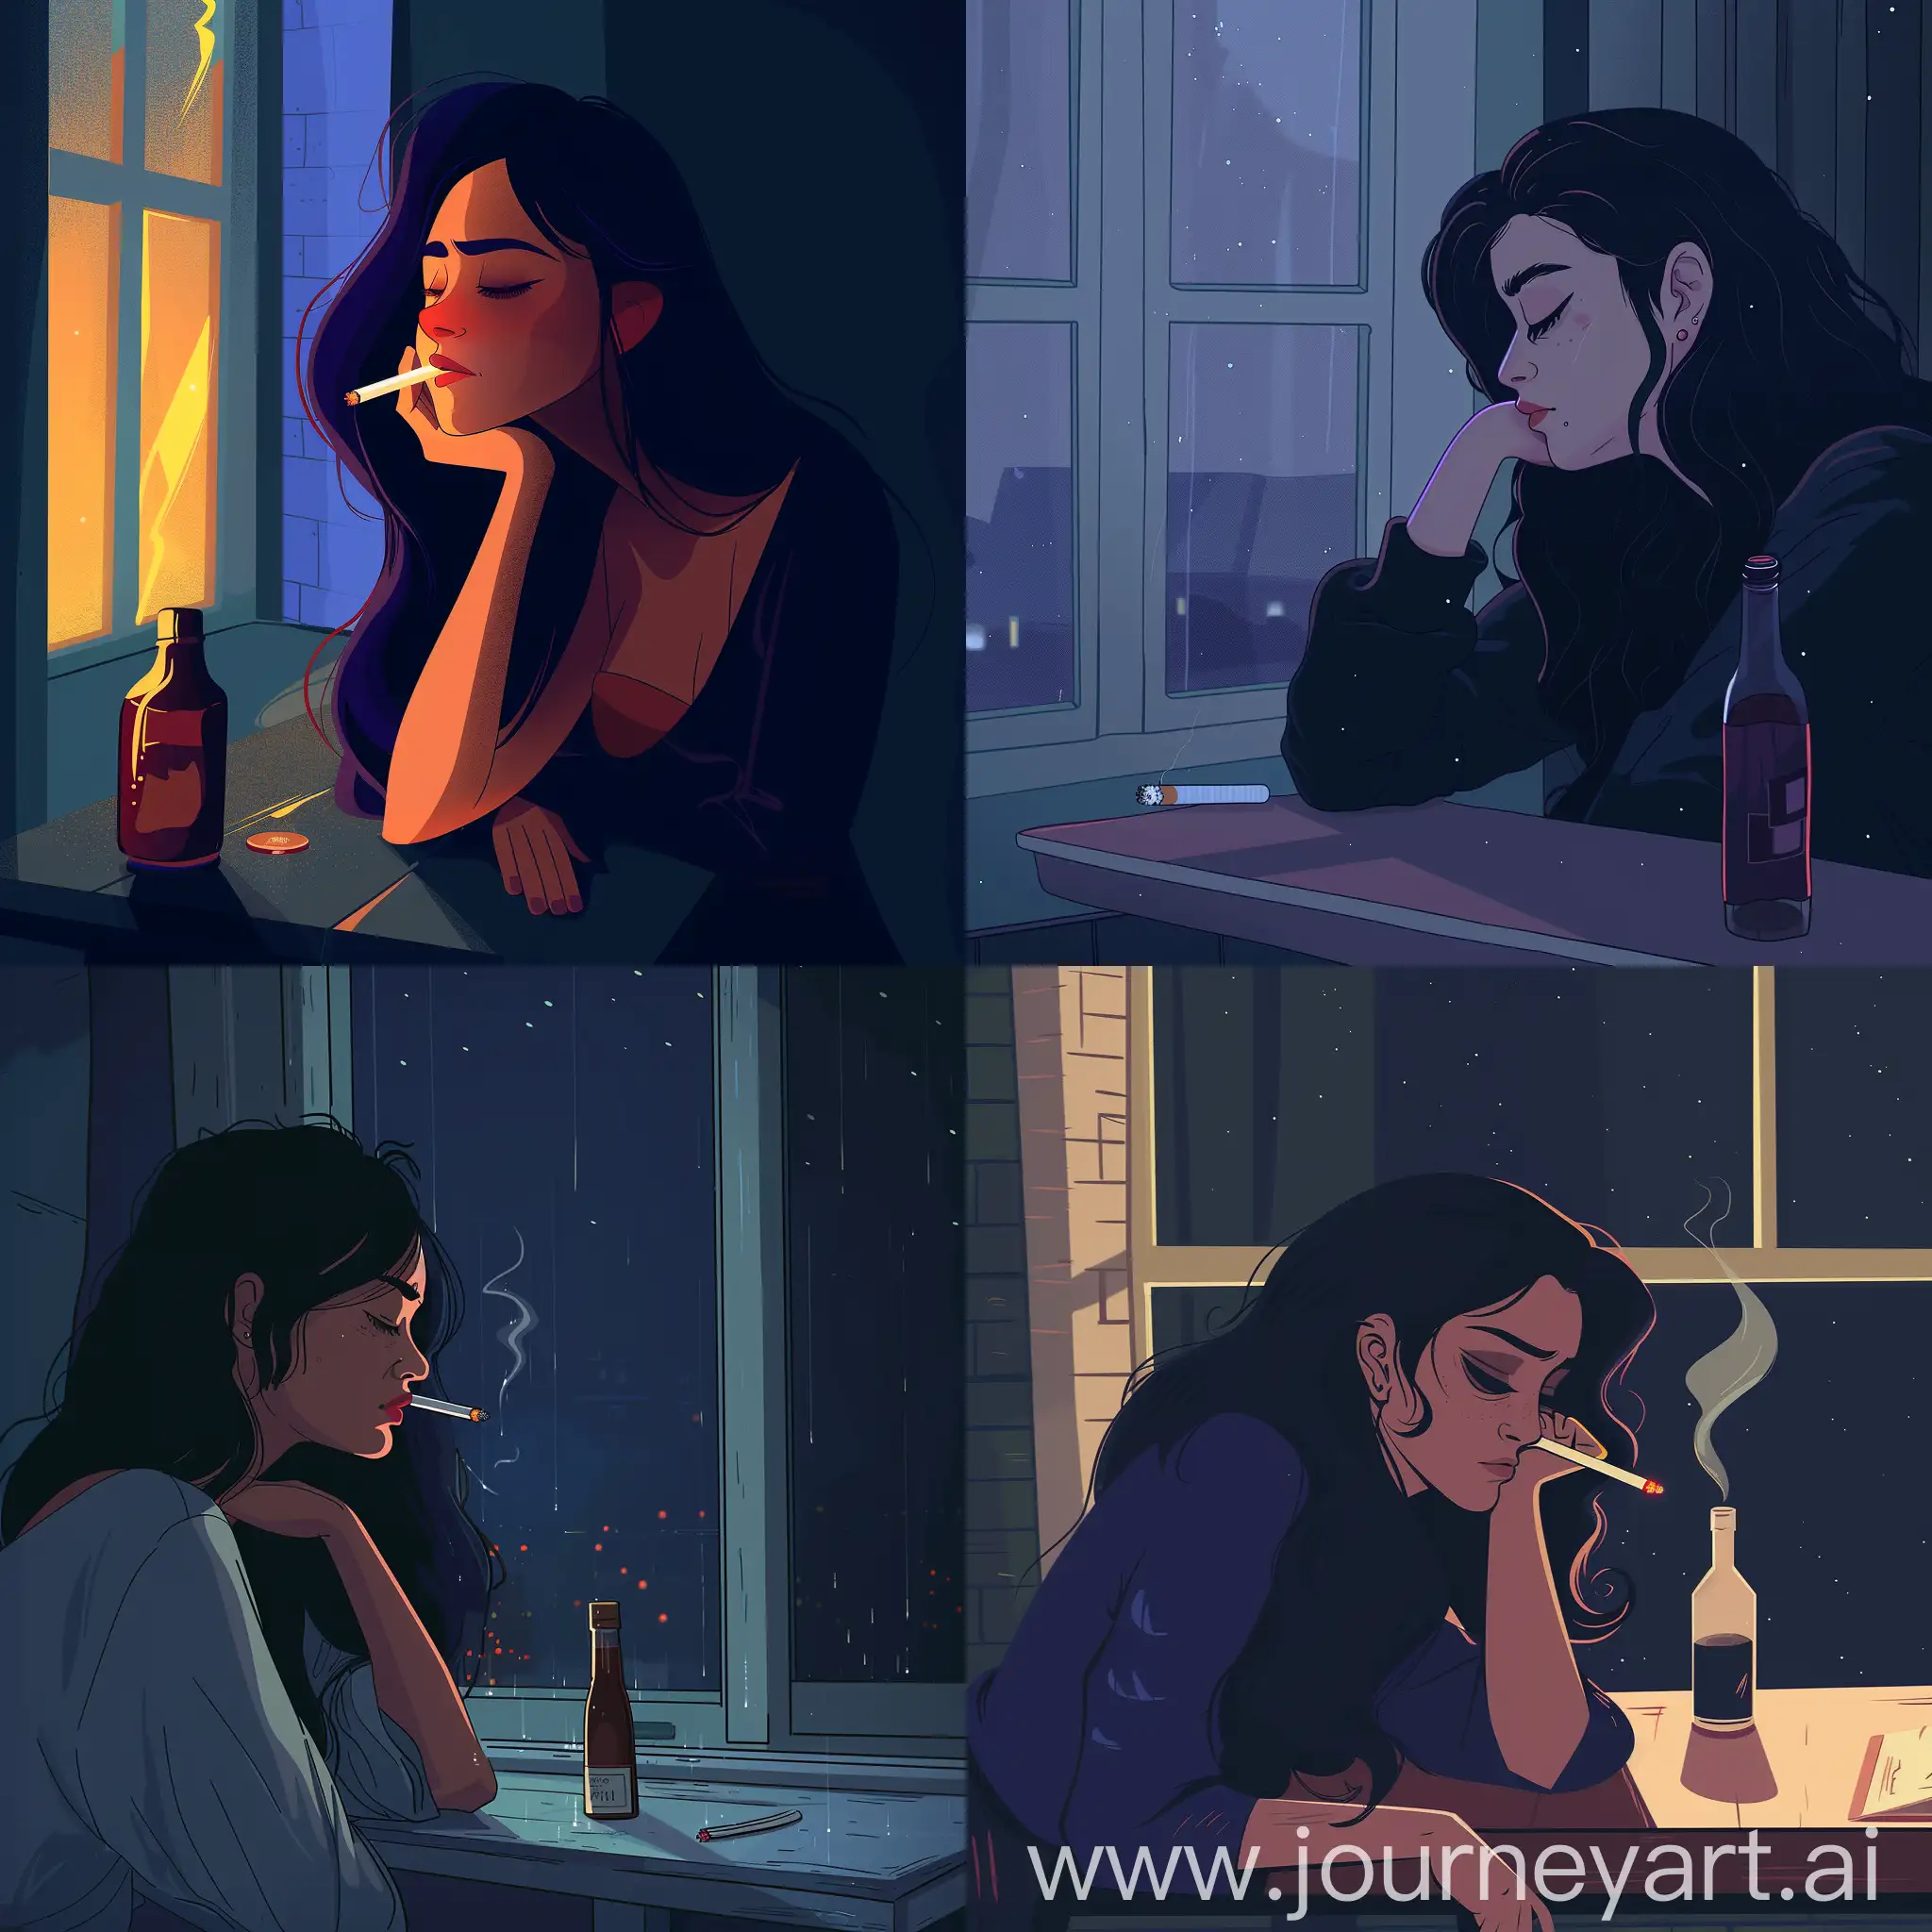 Sad woman with a cigarette leaned against the window at night, bottle at the table, animation style